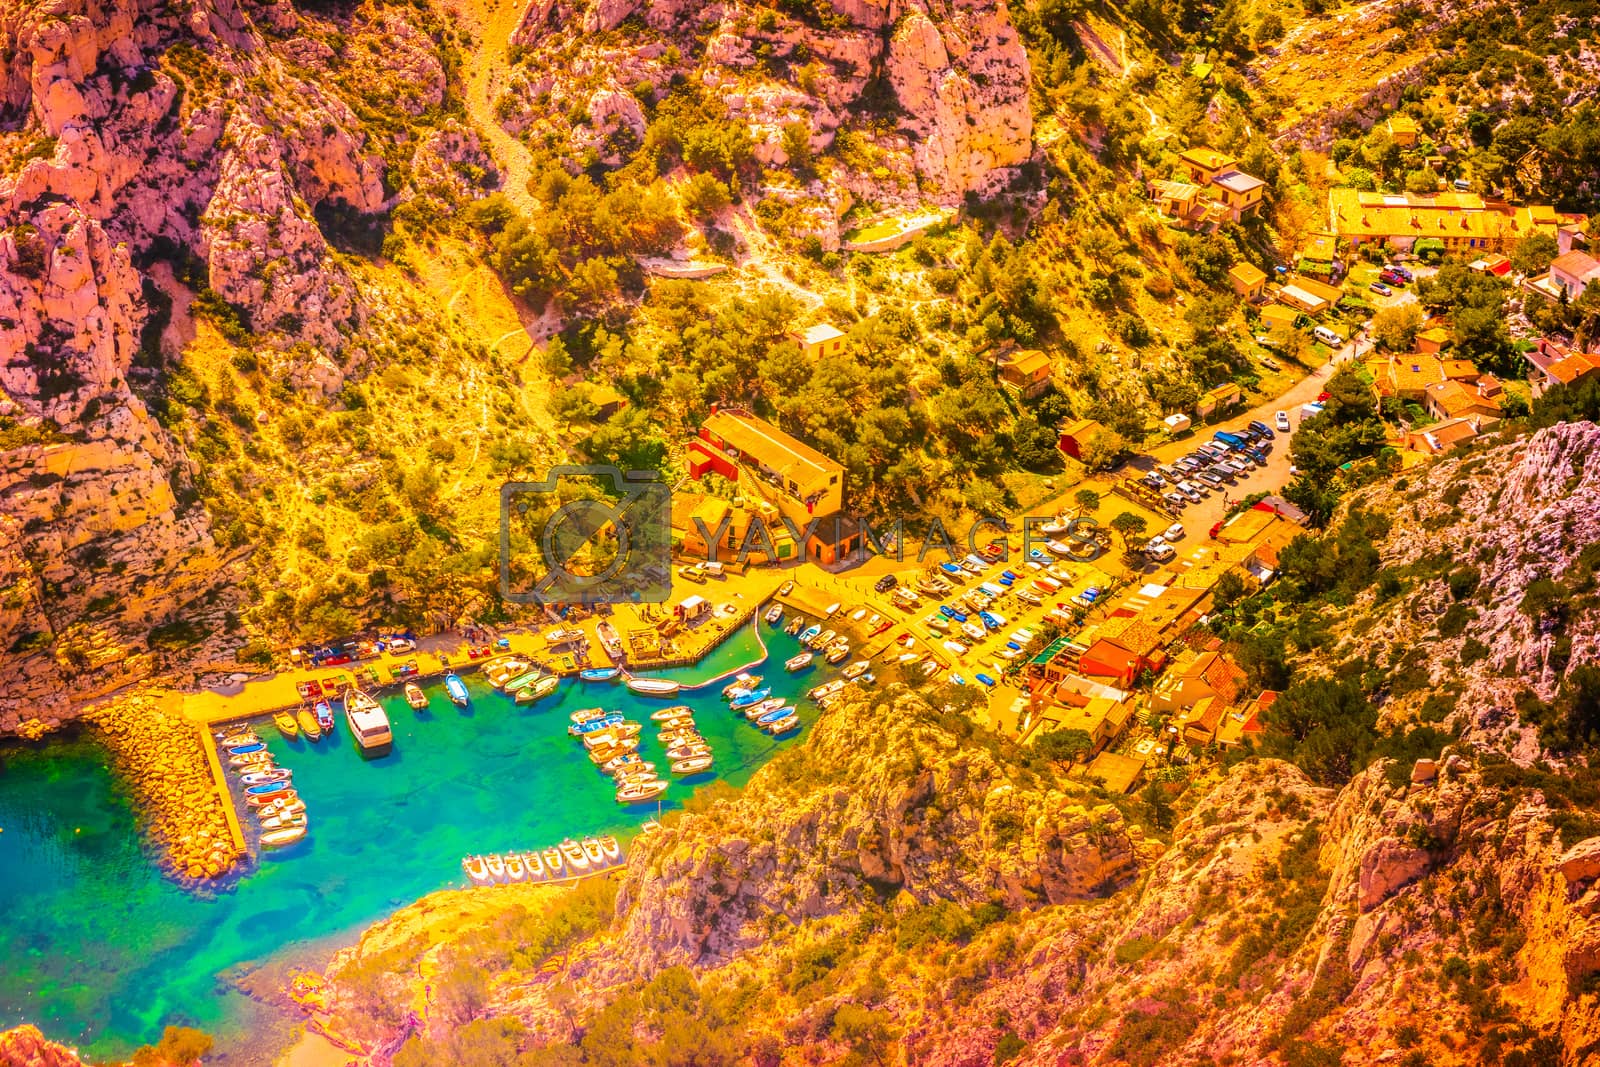 Royalty free image of Calanque at les Calanques national park in France by Romas_ph